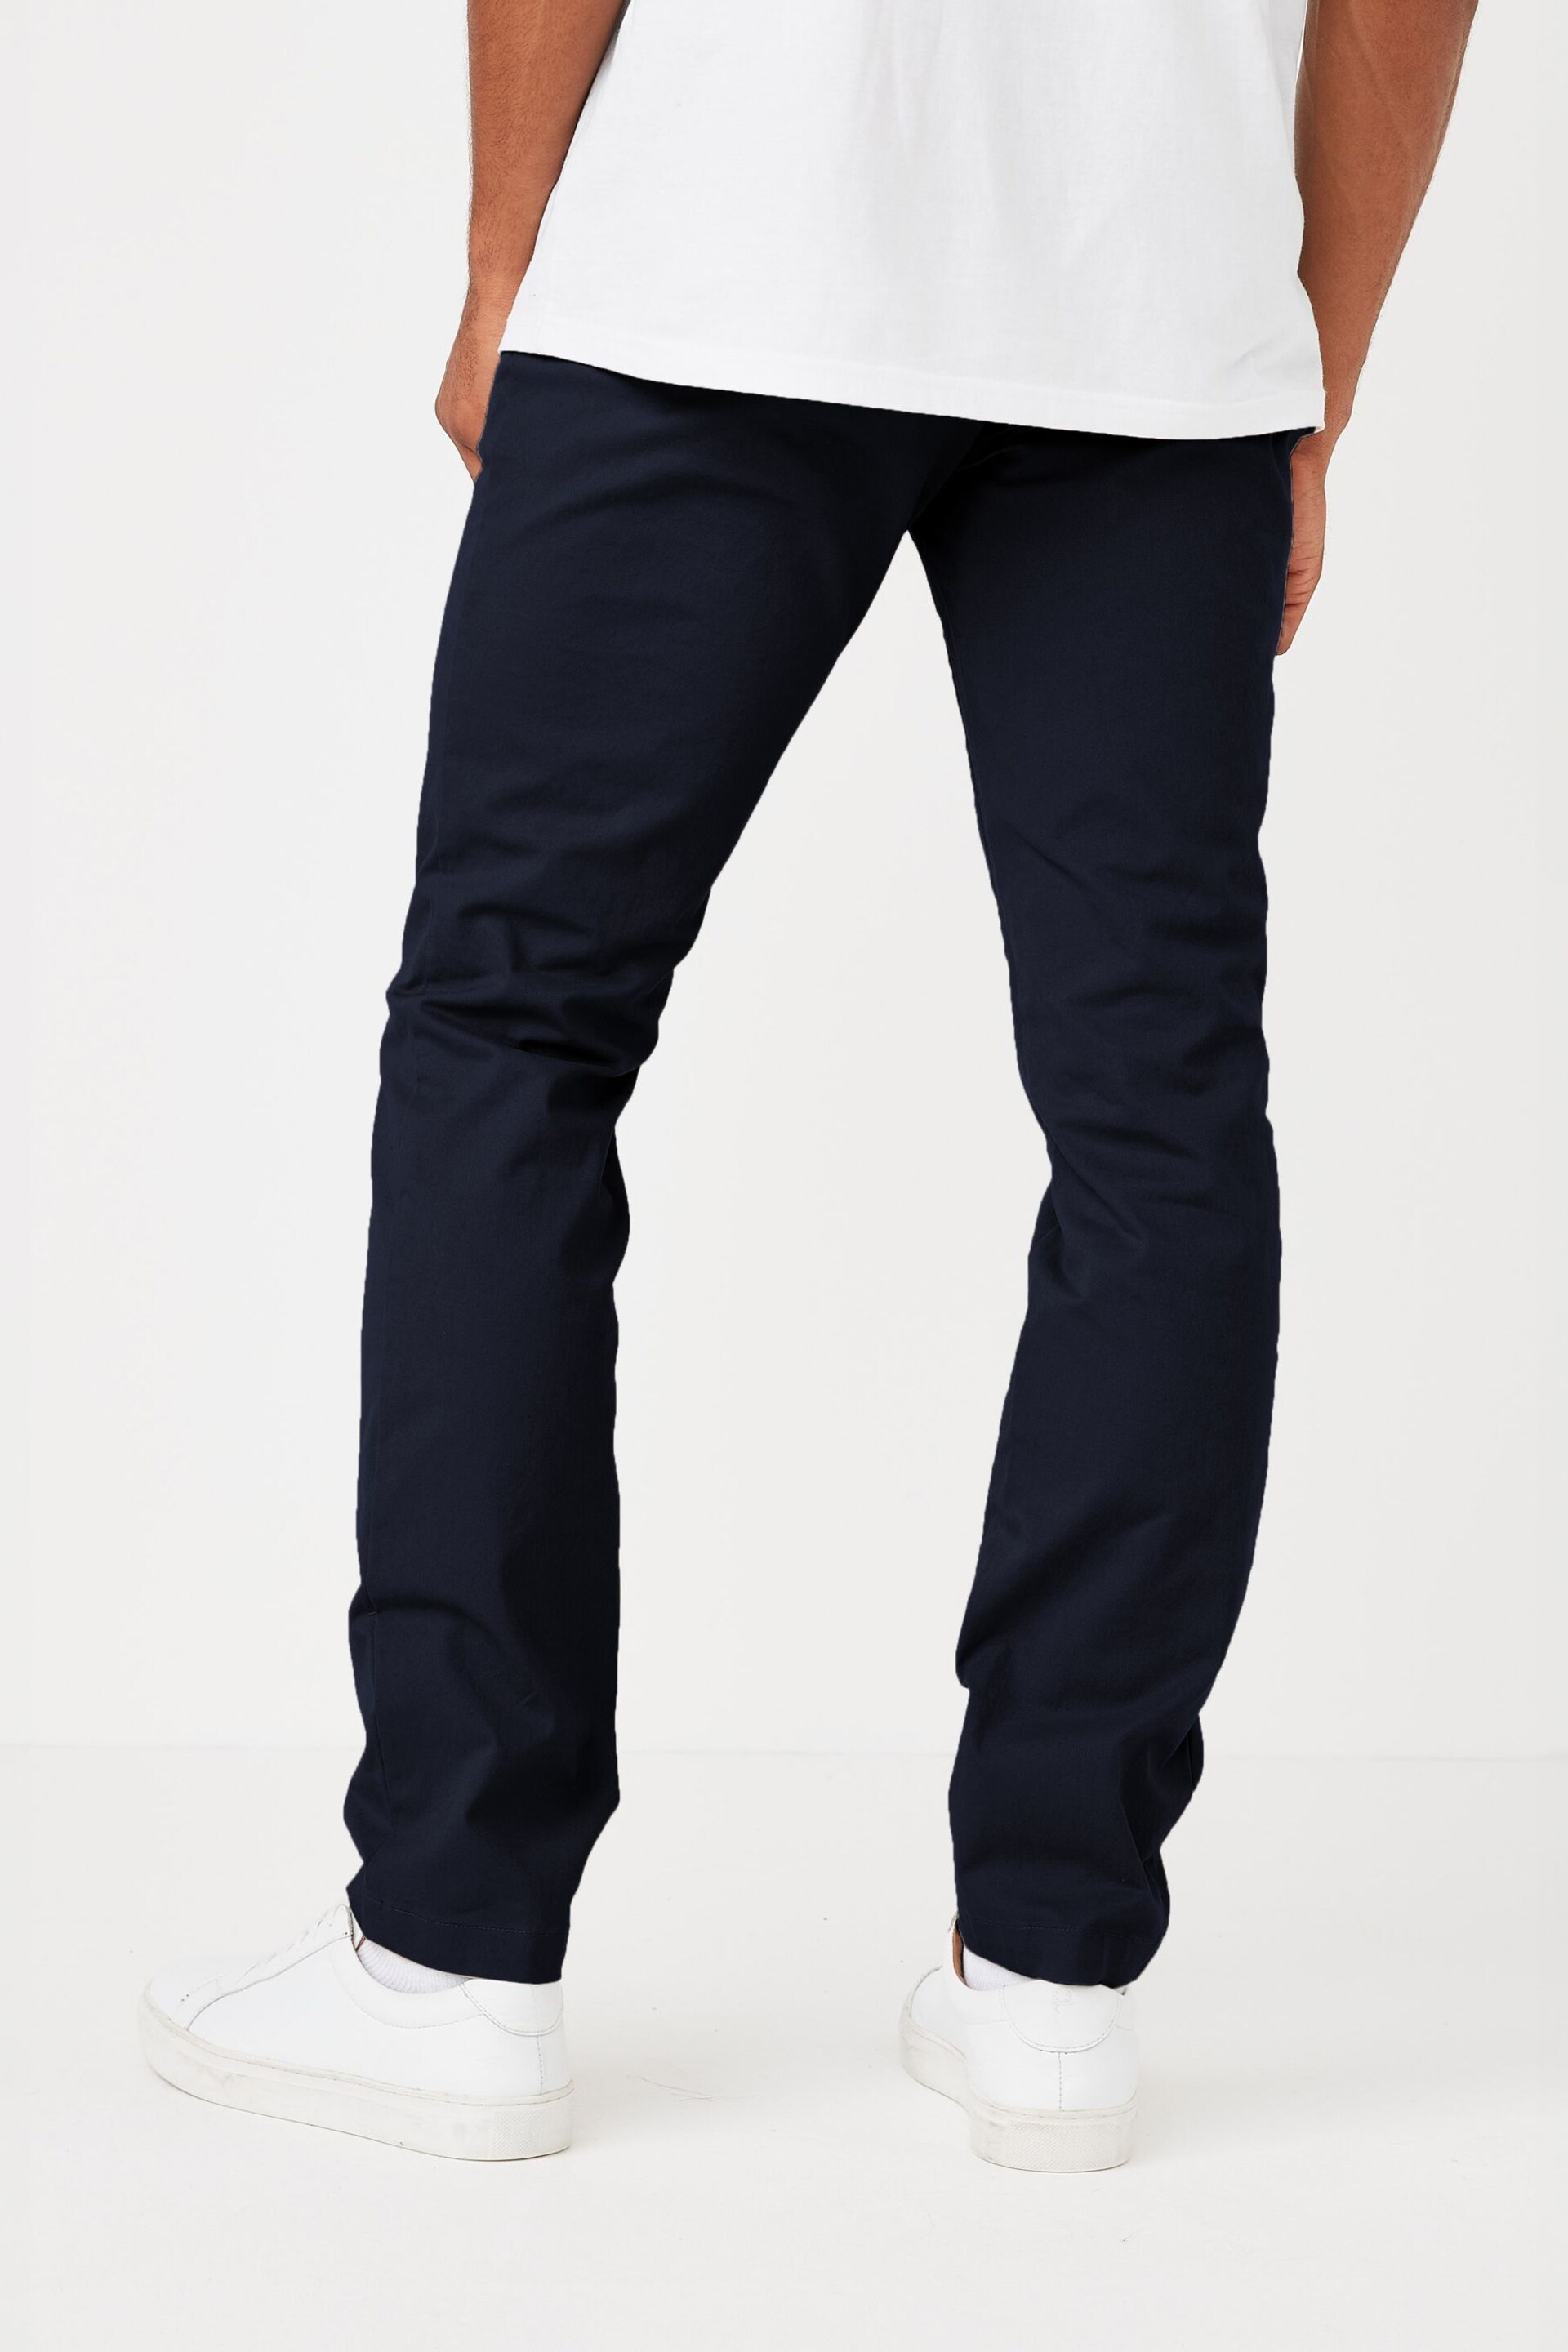 Gap Blue Essential Skinny Fit Chinos - Image 2 of 2